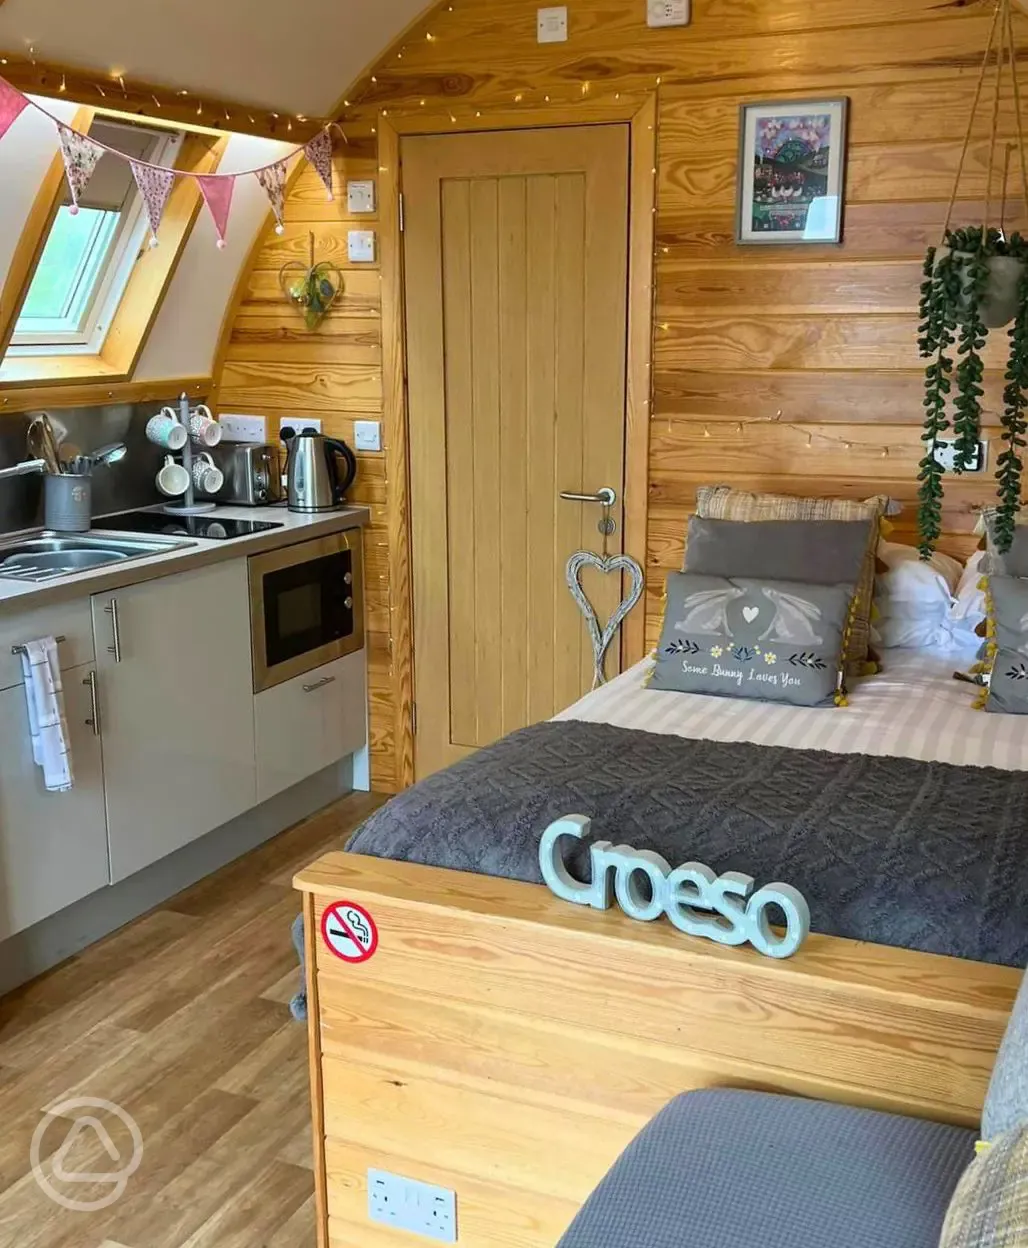 Interior of pod with bed and kitchenette